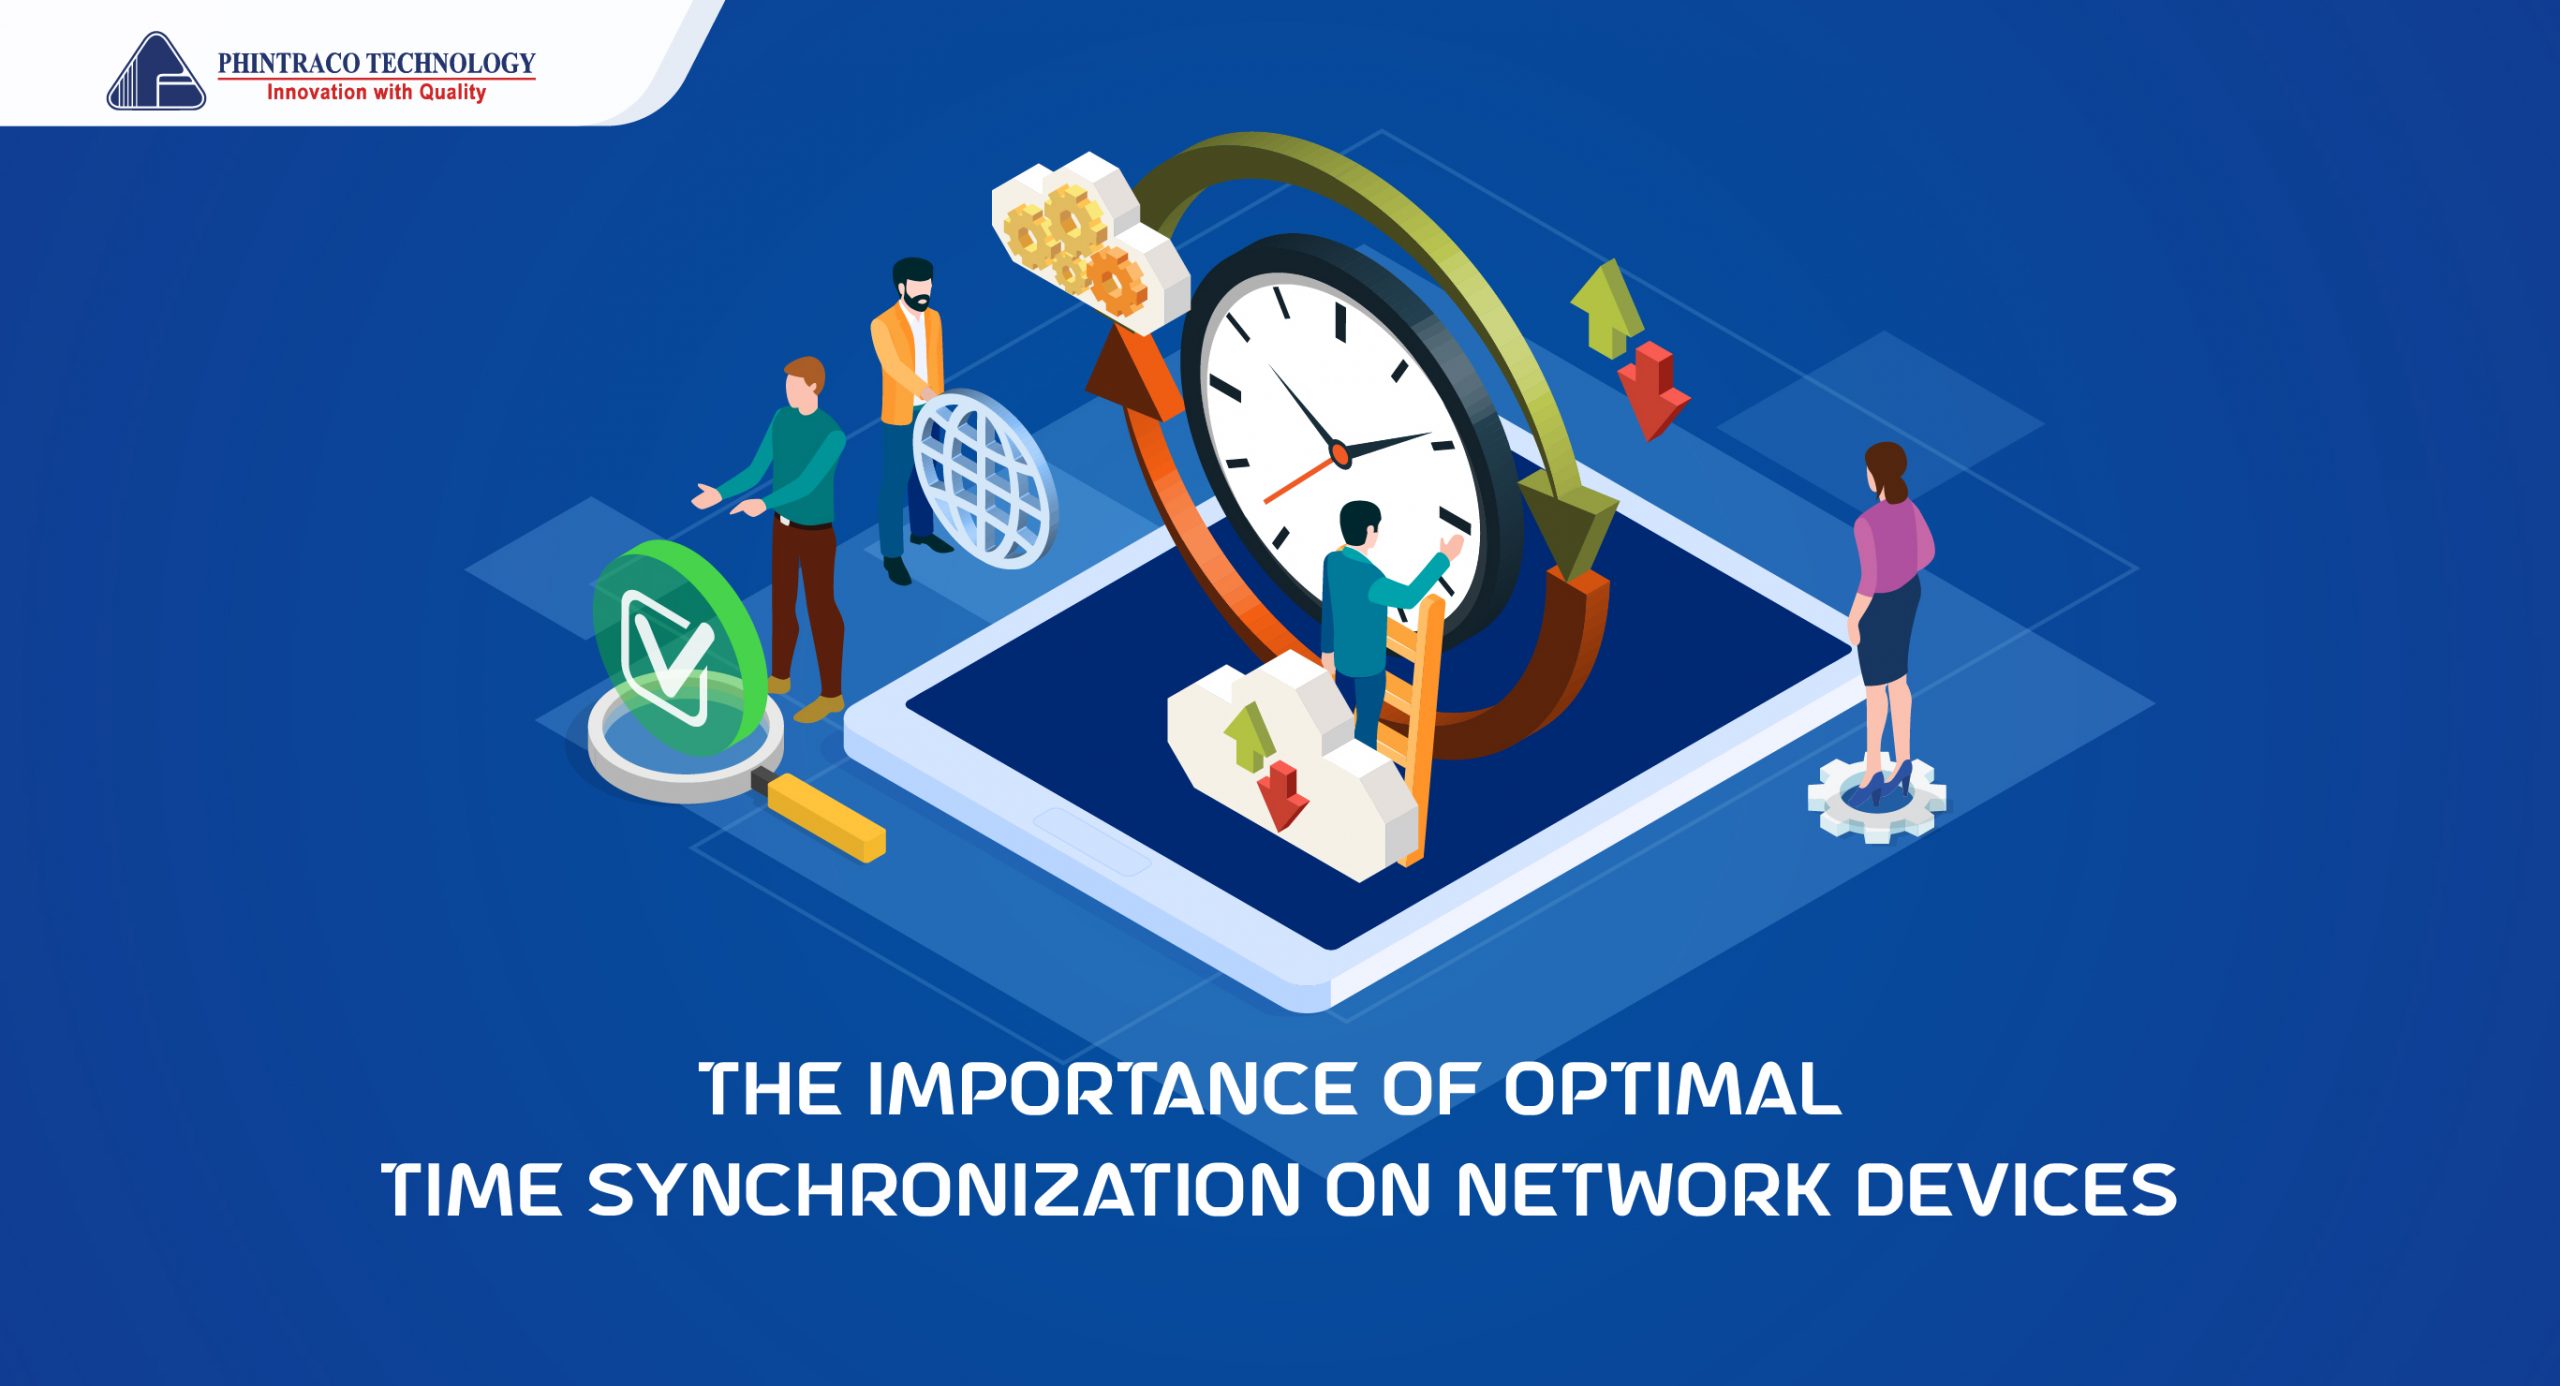 The Importance of Optimal Time Synchronization on Network Devices